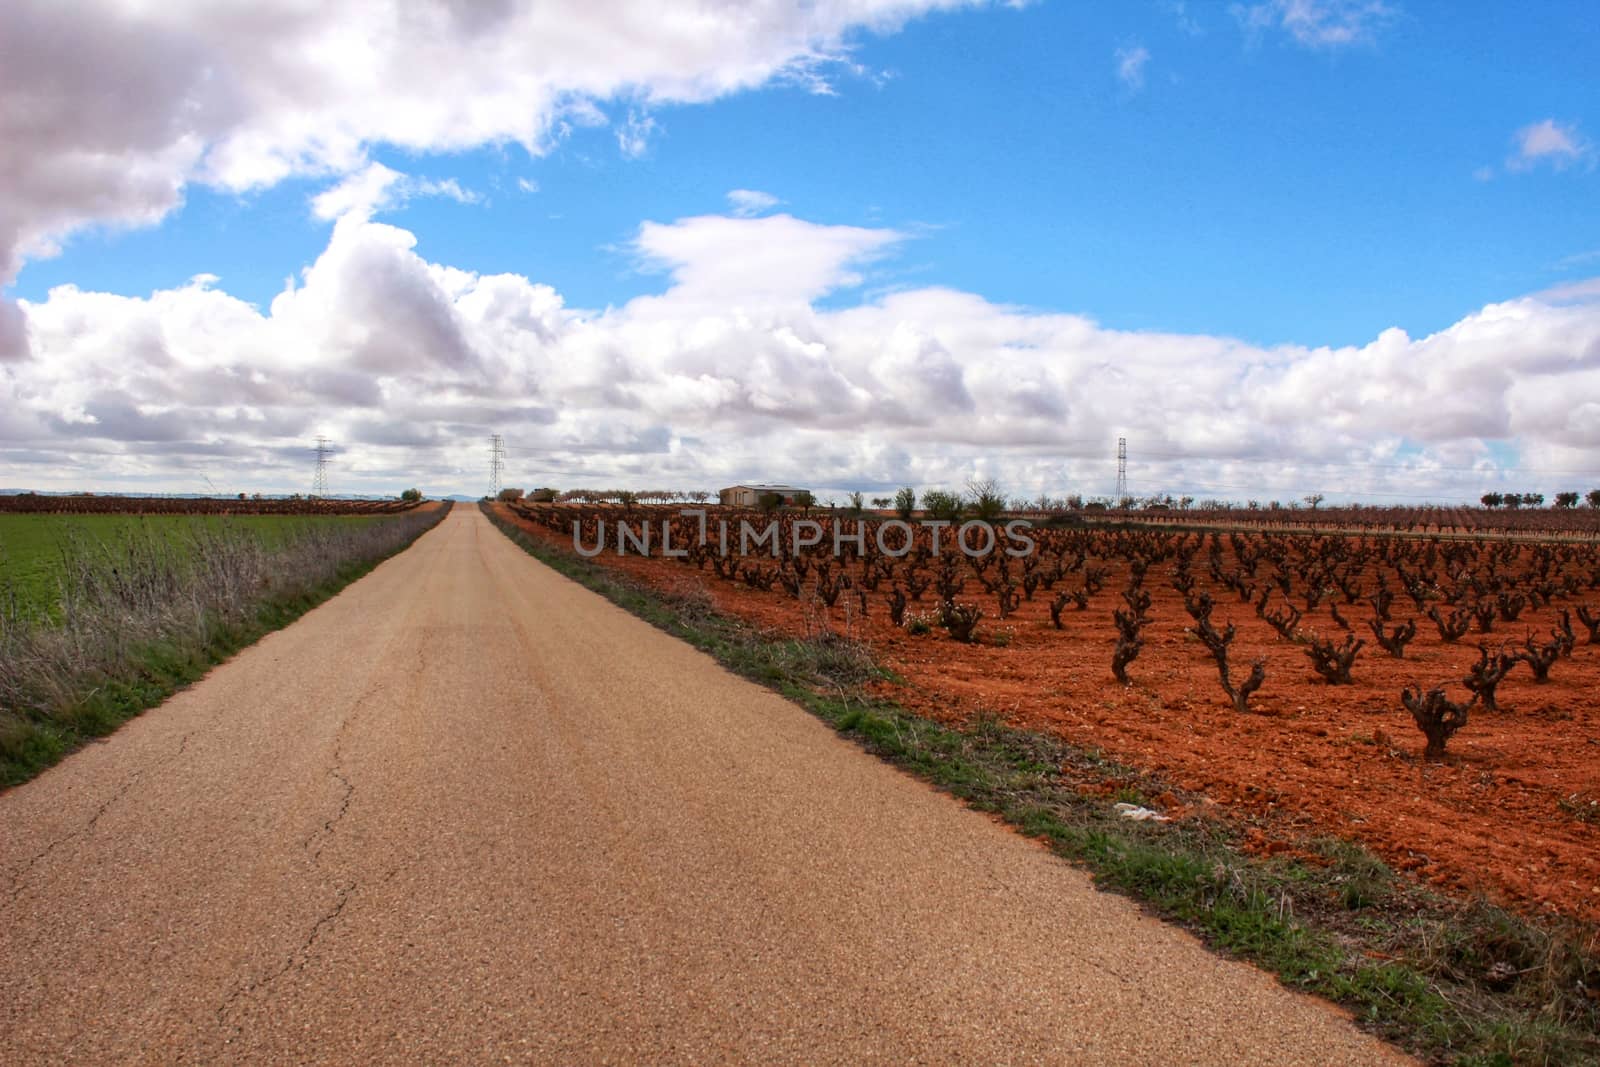 Landscape of vineyards with red land under gray sky next to the road in Castilla la Mancha, Spain